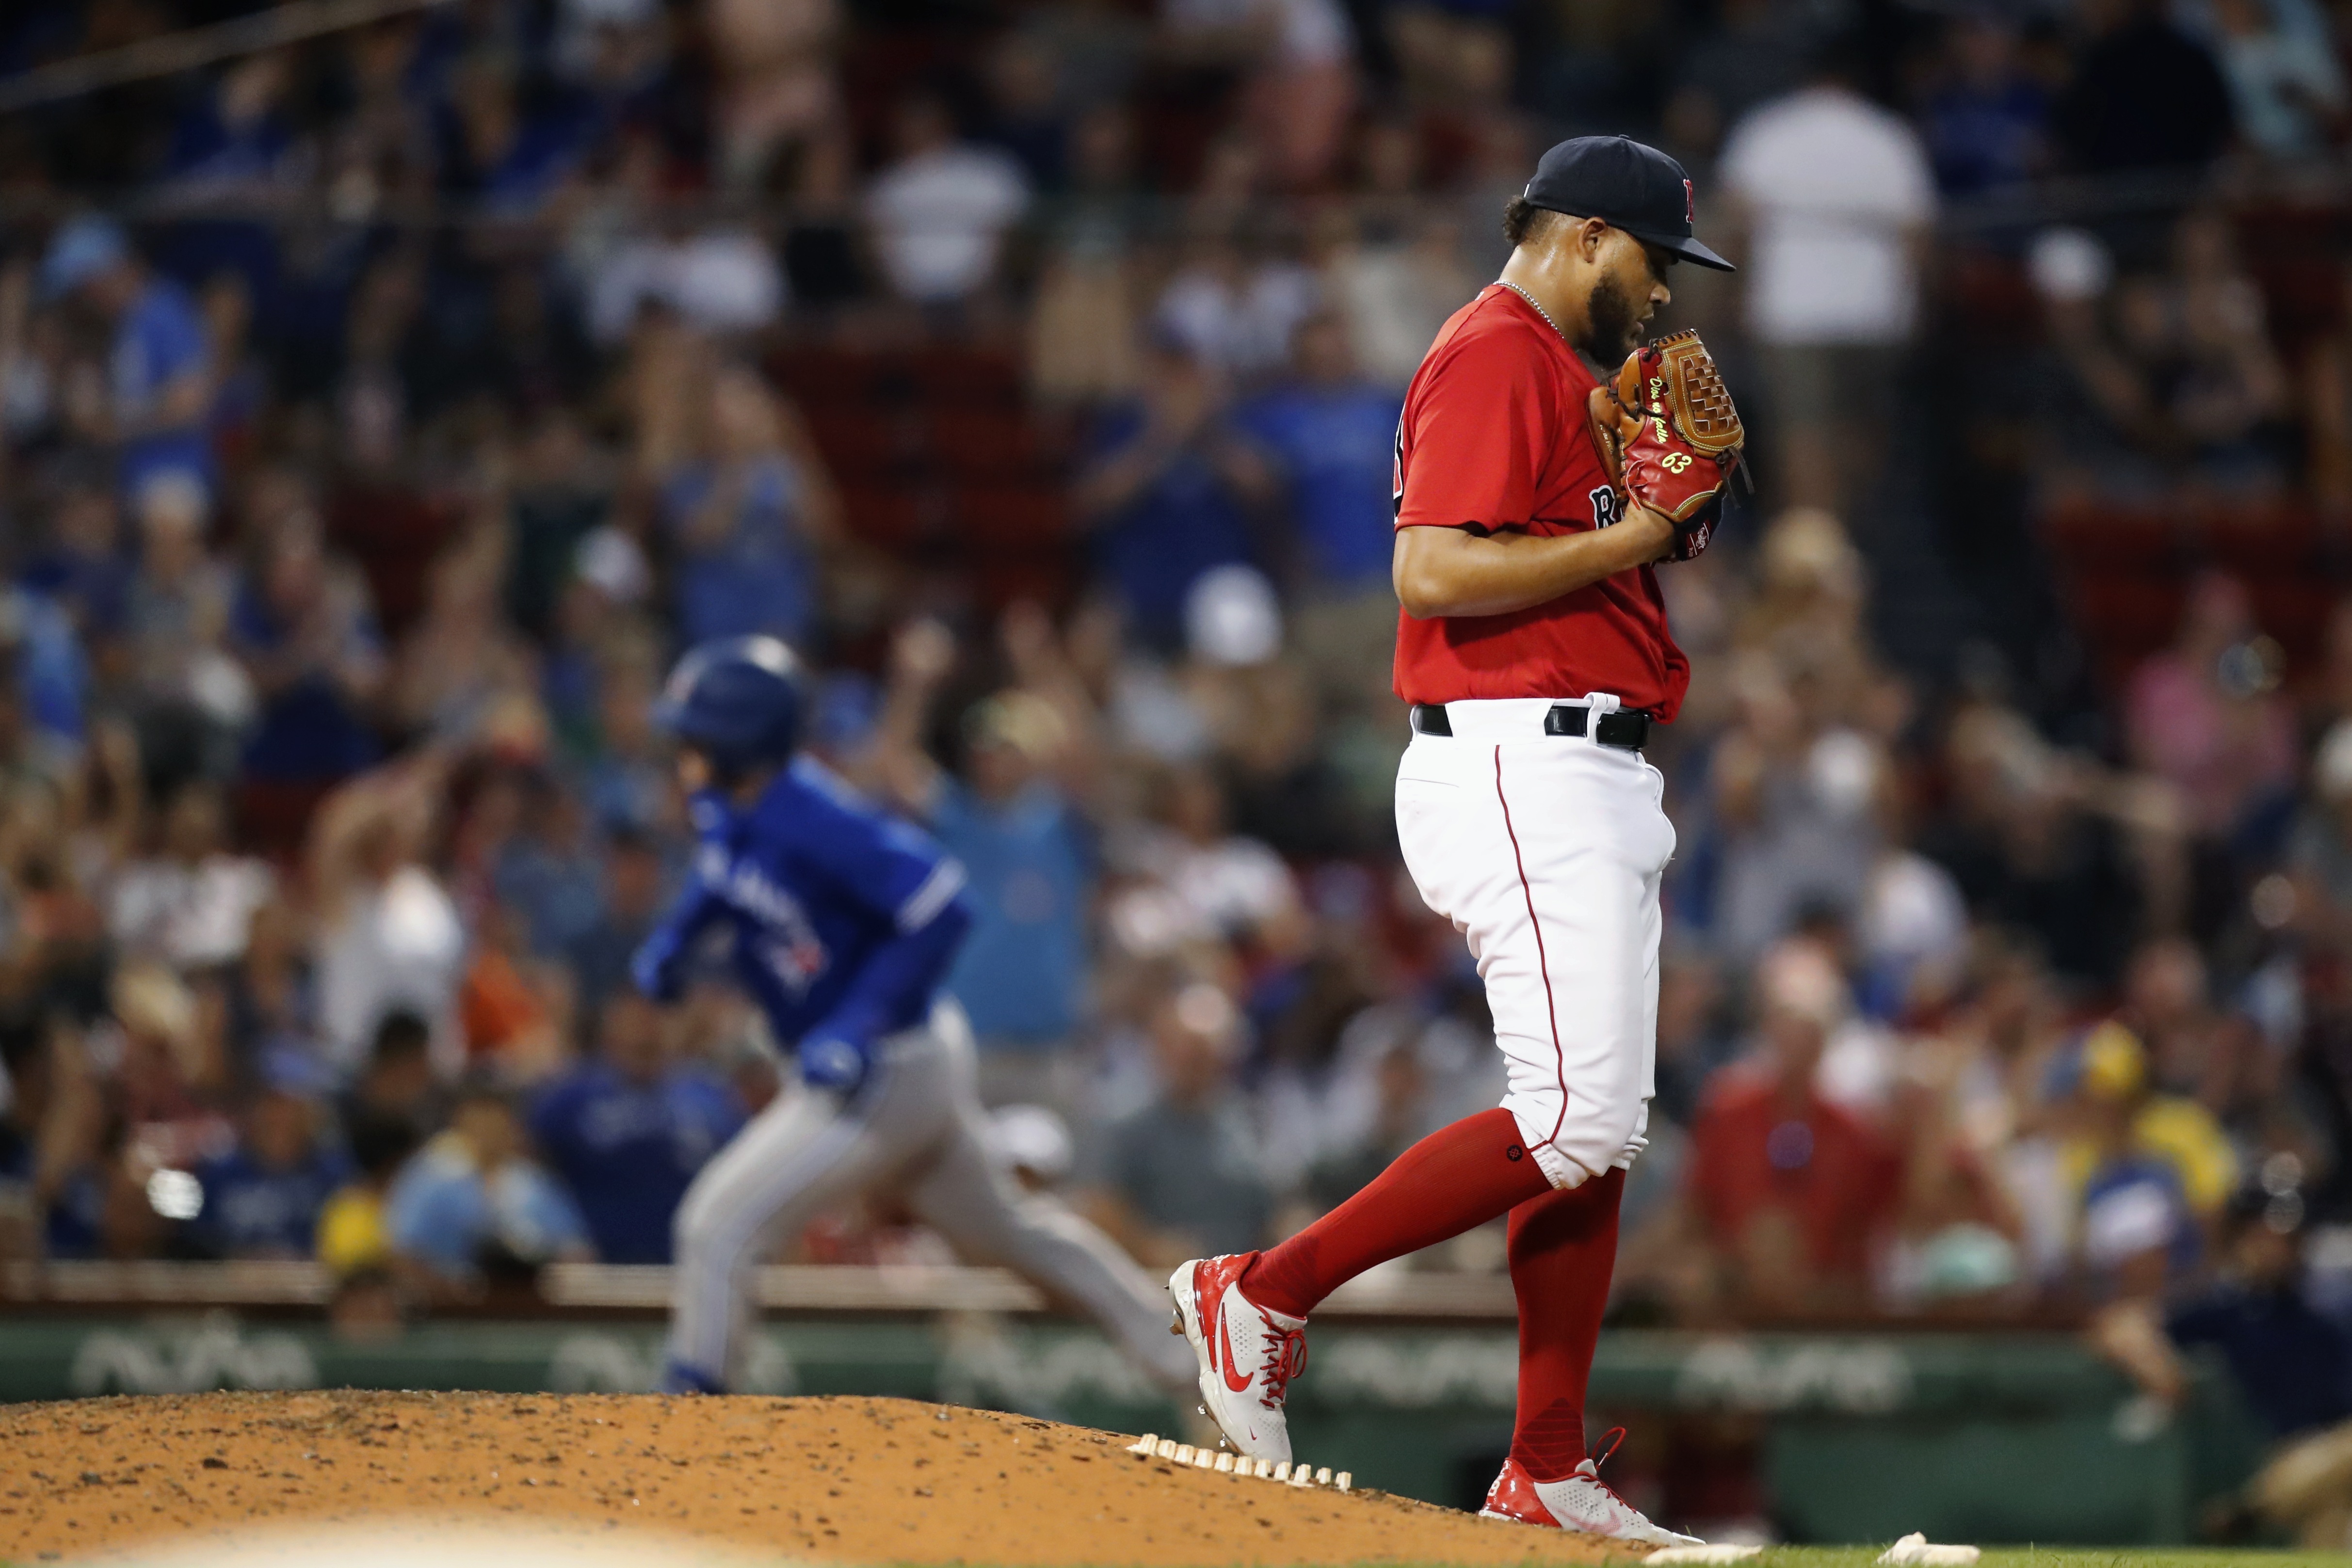 McAdam: At .500 after 20 games, Red Sox have stabilized some